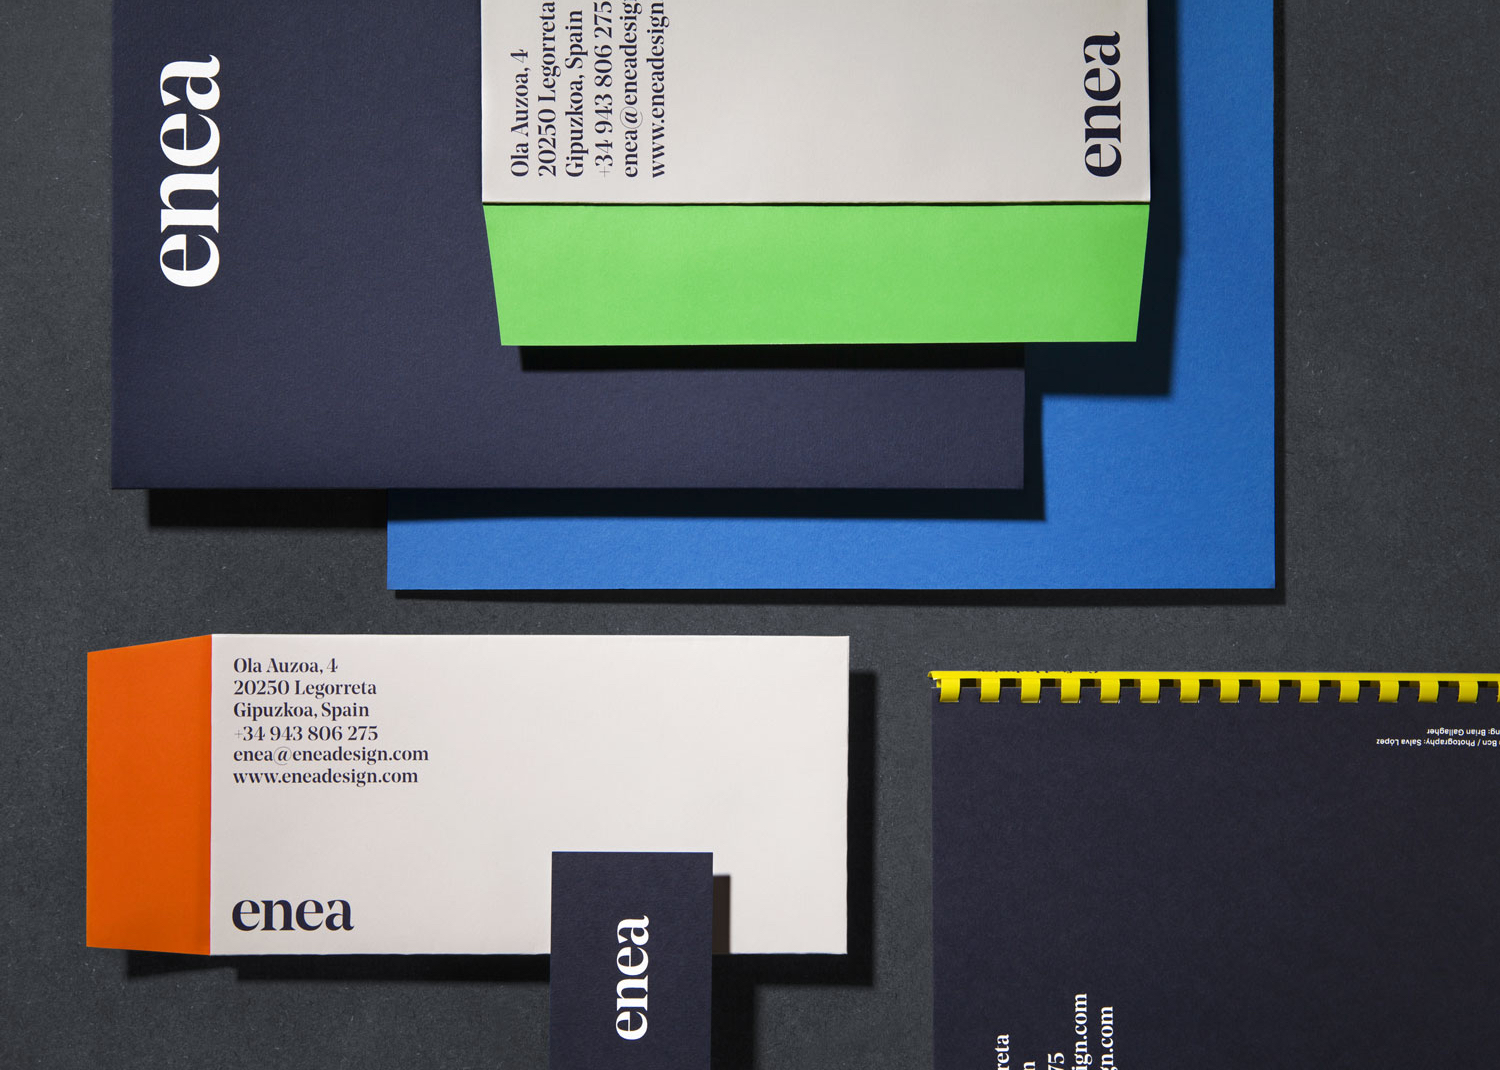 Visual identity and stationery for furniture design and manufacturing business Enea designed by Clase bcn 